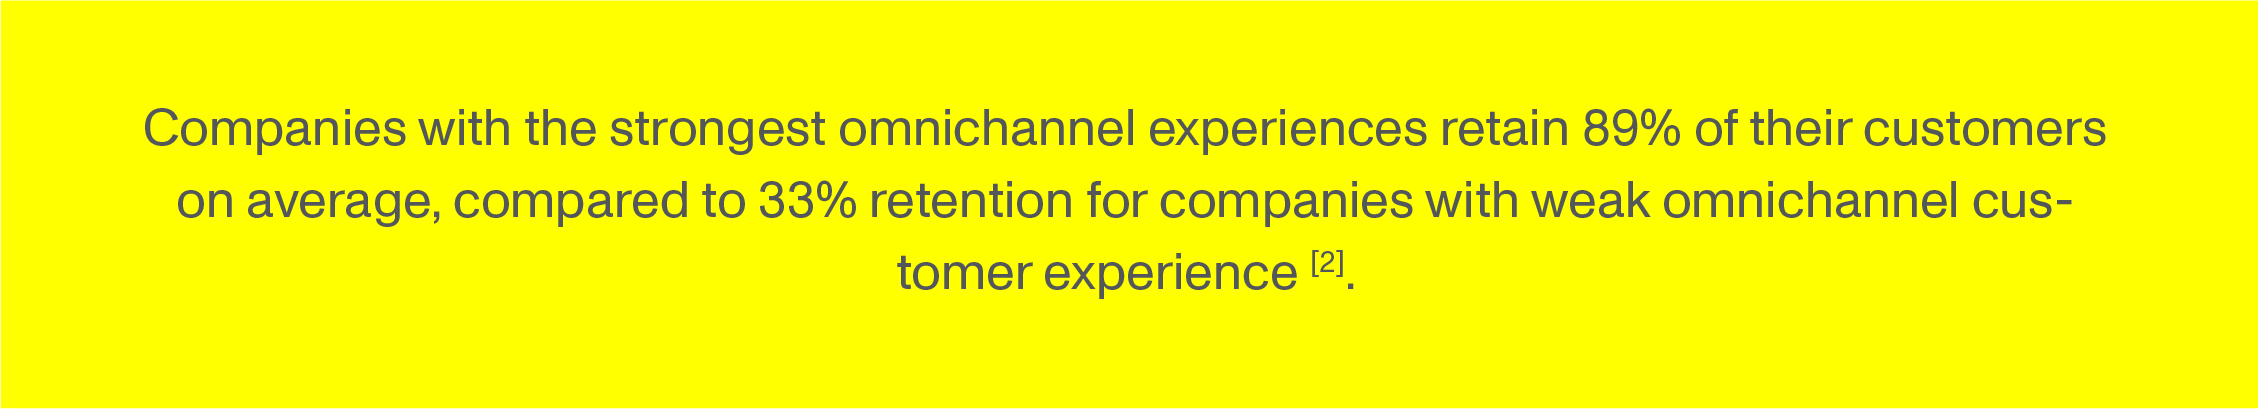 Companies with the strongest omnichannel experiences retain 89% of their customers on average, compared to 33% retention for companies with weak omnichannel customer experience